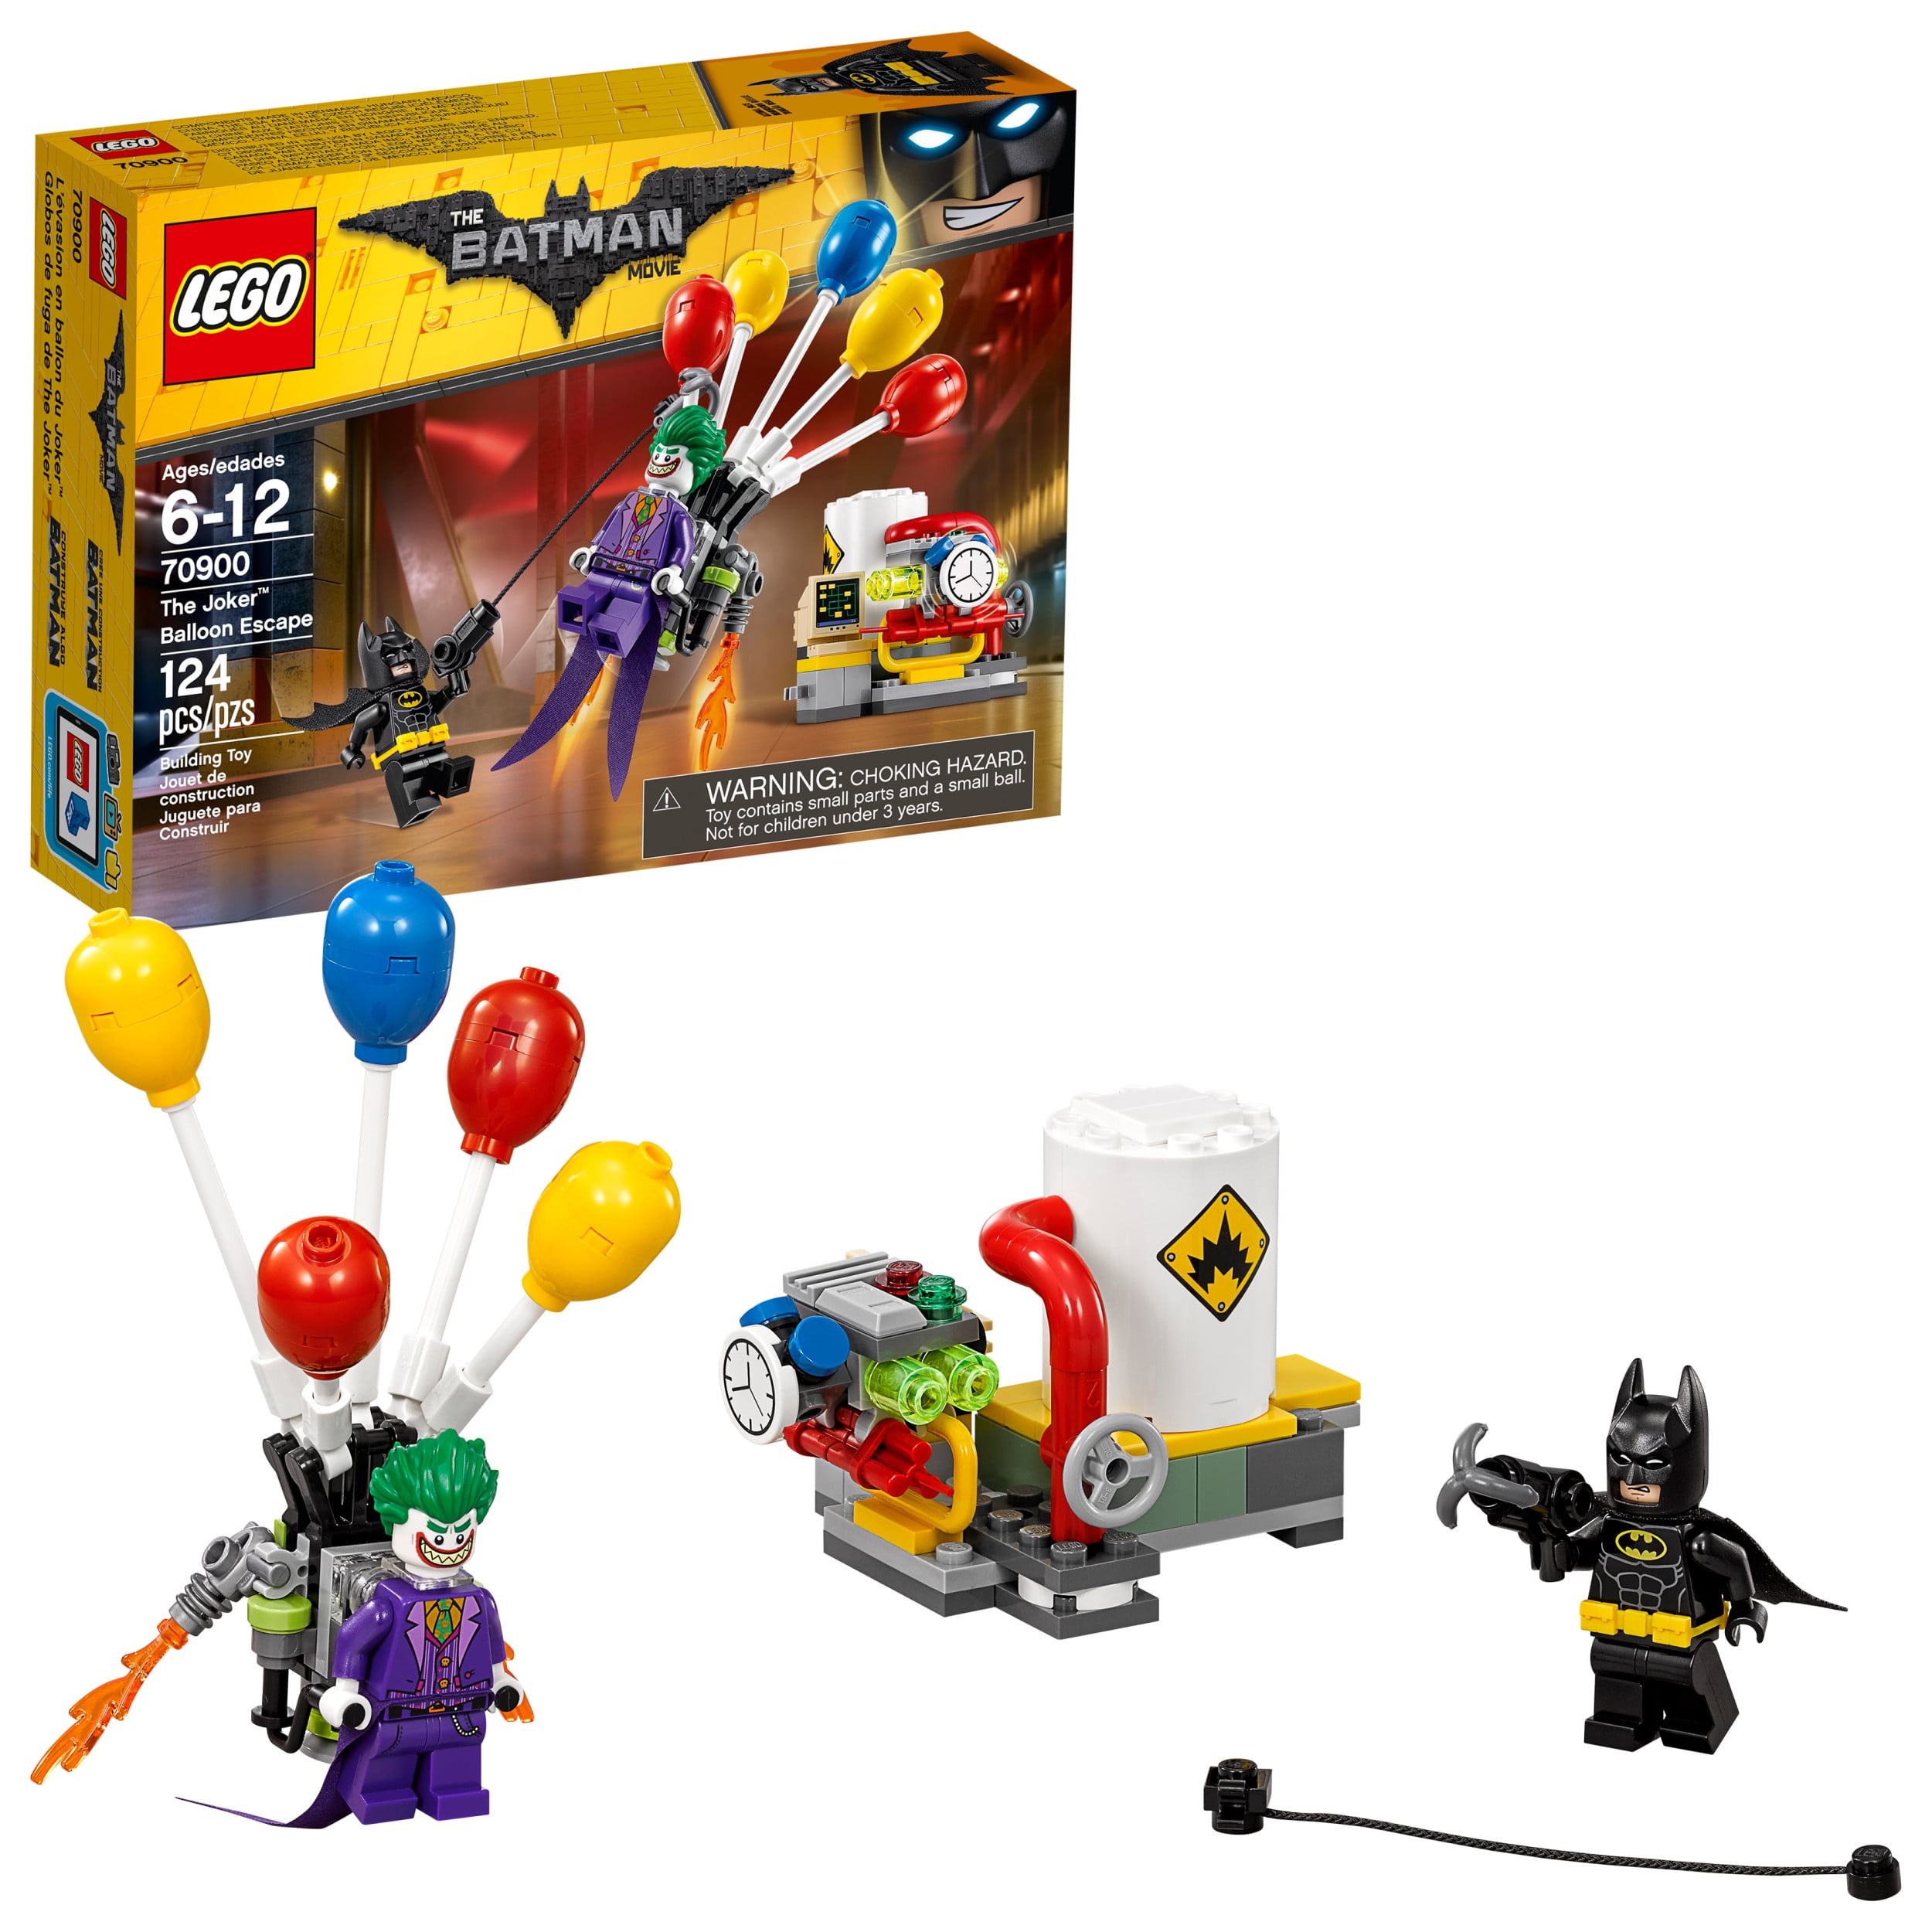 LEGO - Are you ready for more LEGO Batman Movie sets? Get